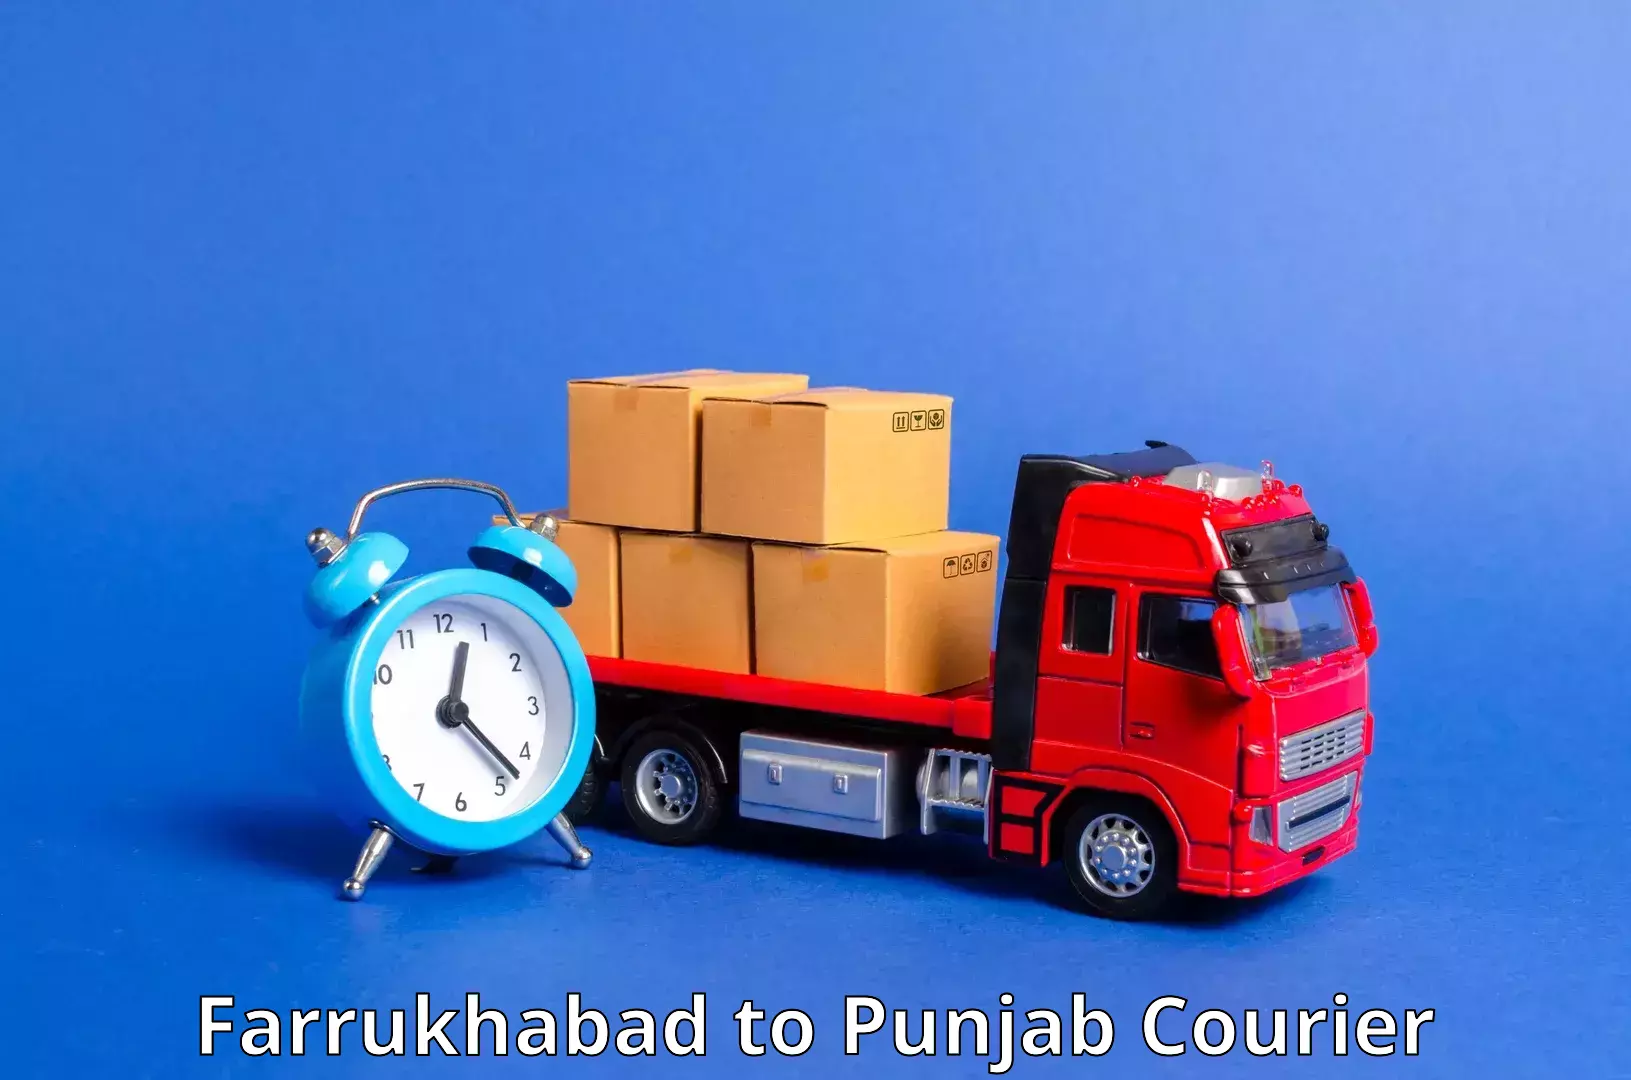 Nationwide delivery network Farrukhabad to Ajnala